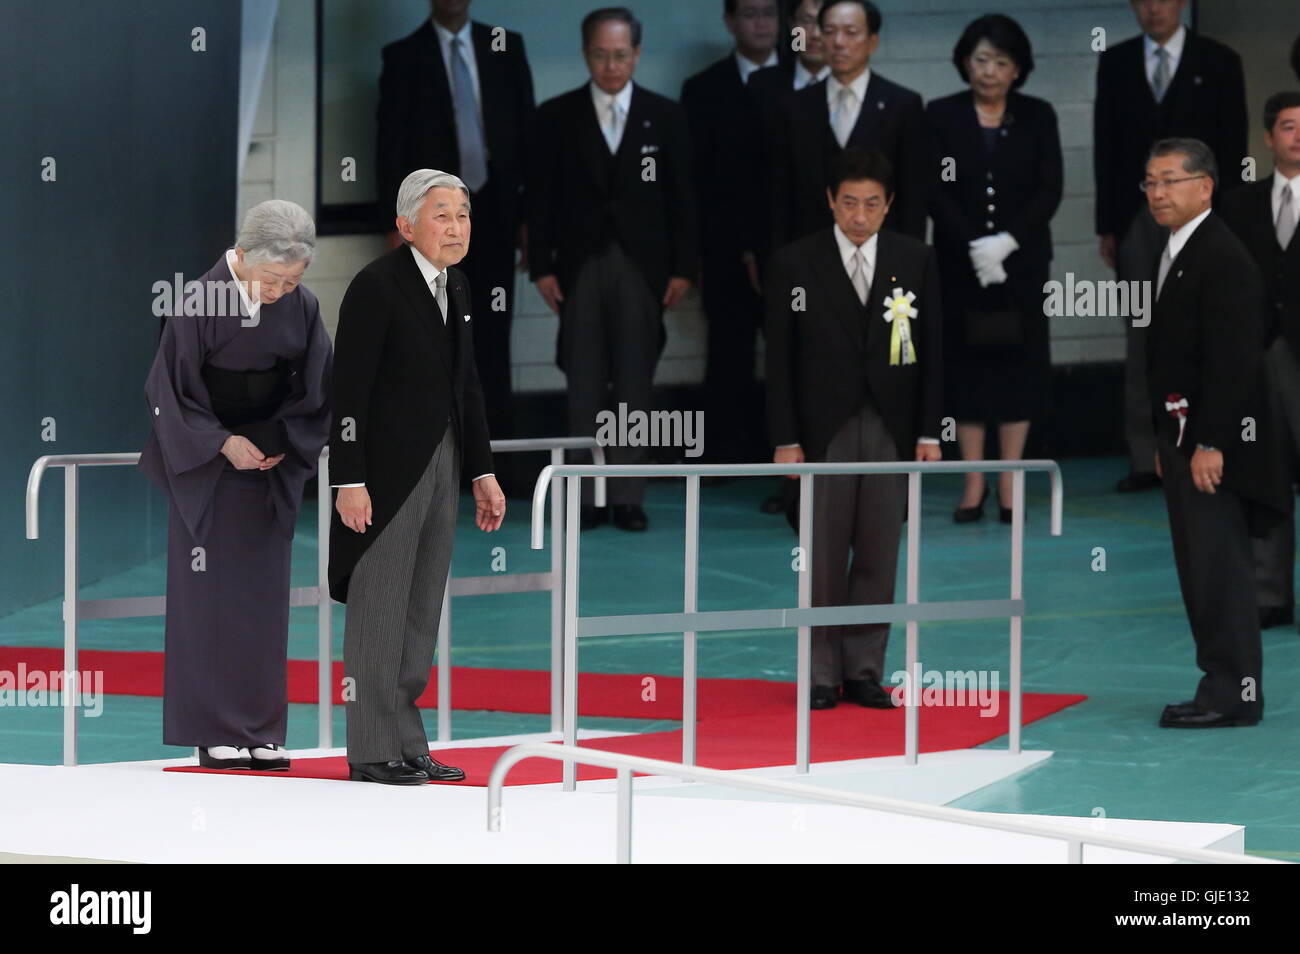 Japanese Emperor Akihito and Empress Michiko attend the official annual memorial service for war victims of the 71st anniversary of the end of the World War II at Nippon Budokan, Tokyo, Japan, on 15 Aug 2016. © Motoo Naka/AFLO/Alamy Live News Stock Photo